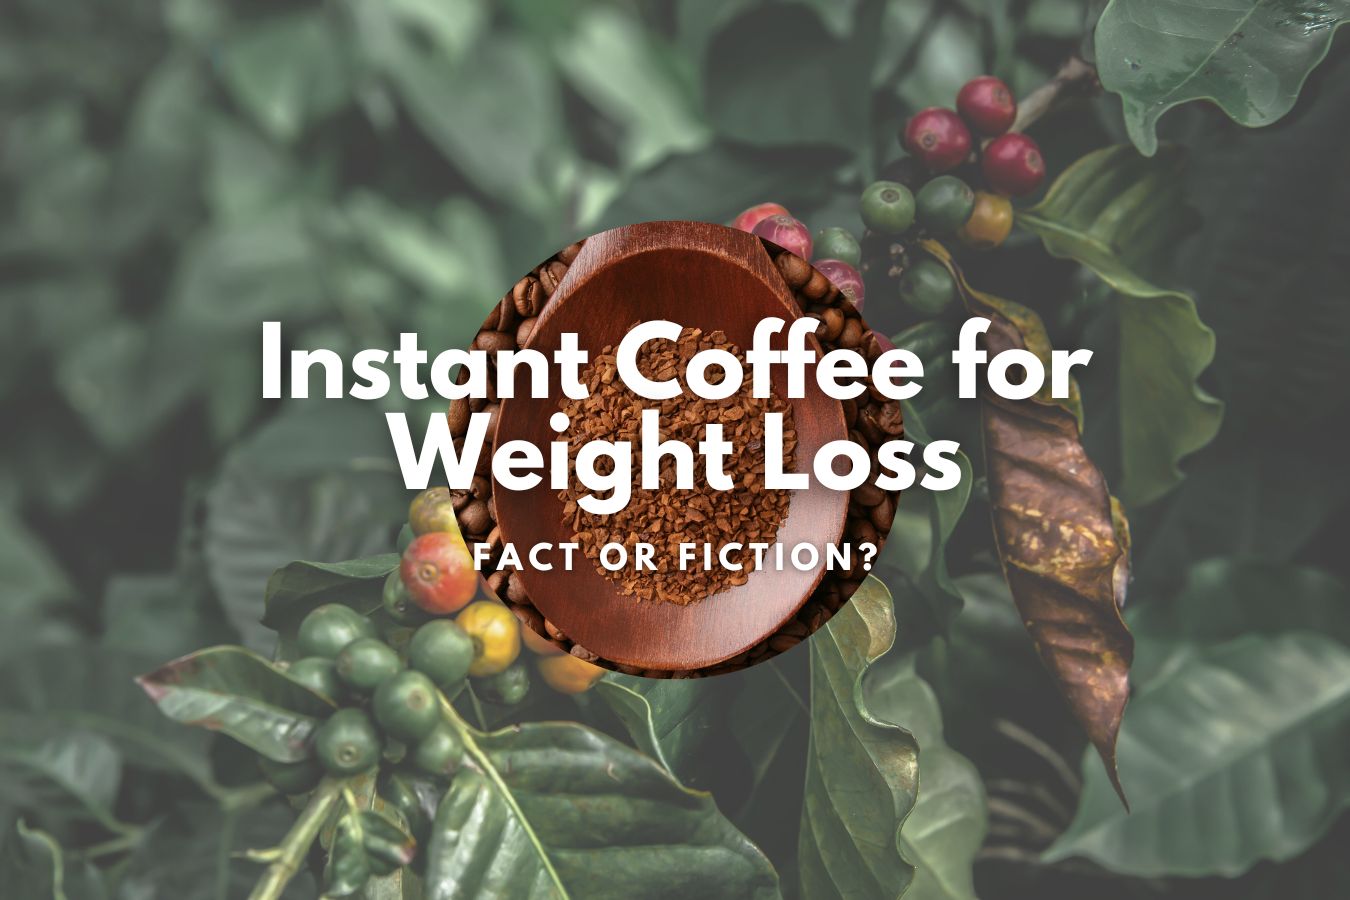 Instant Coffee for Weight Loss Fact or Fiction